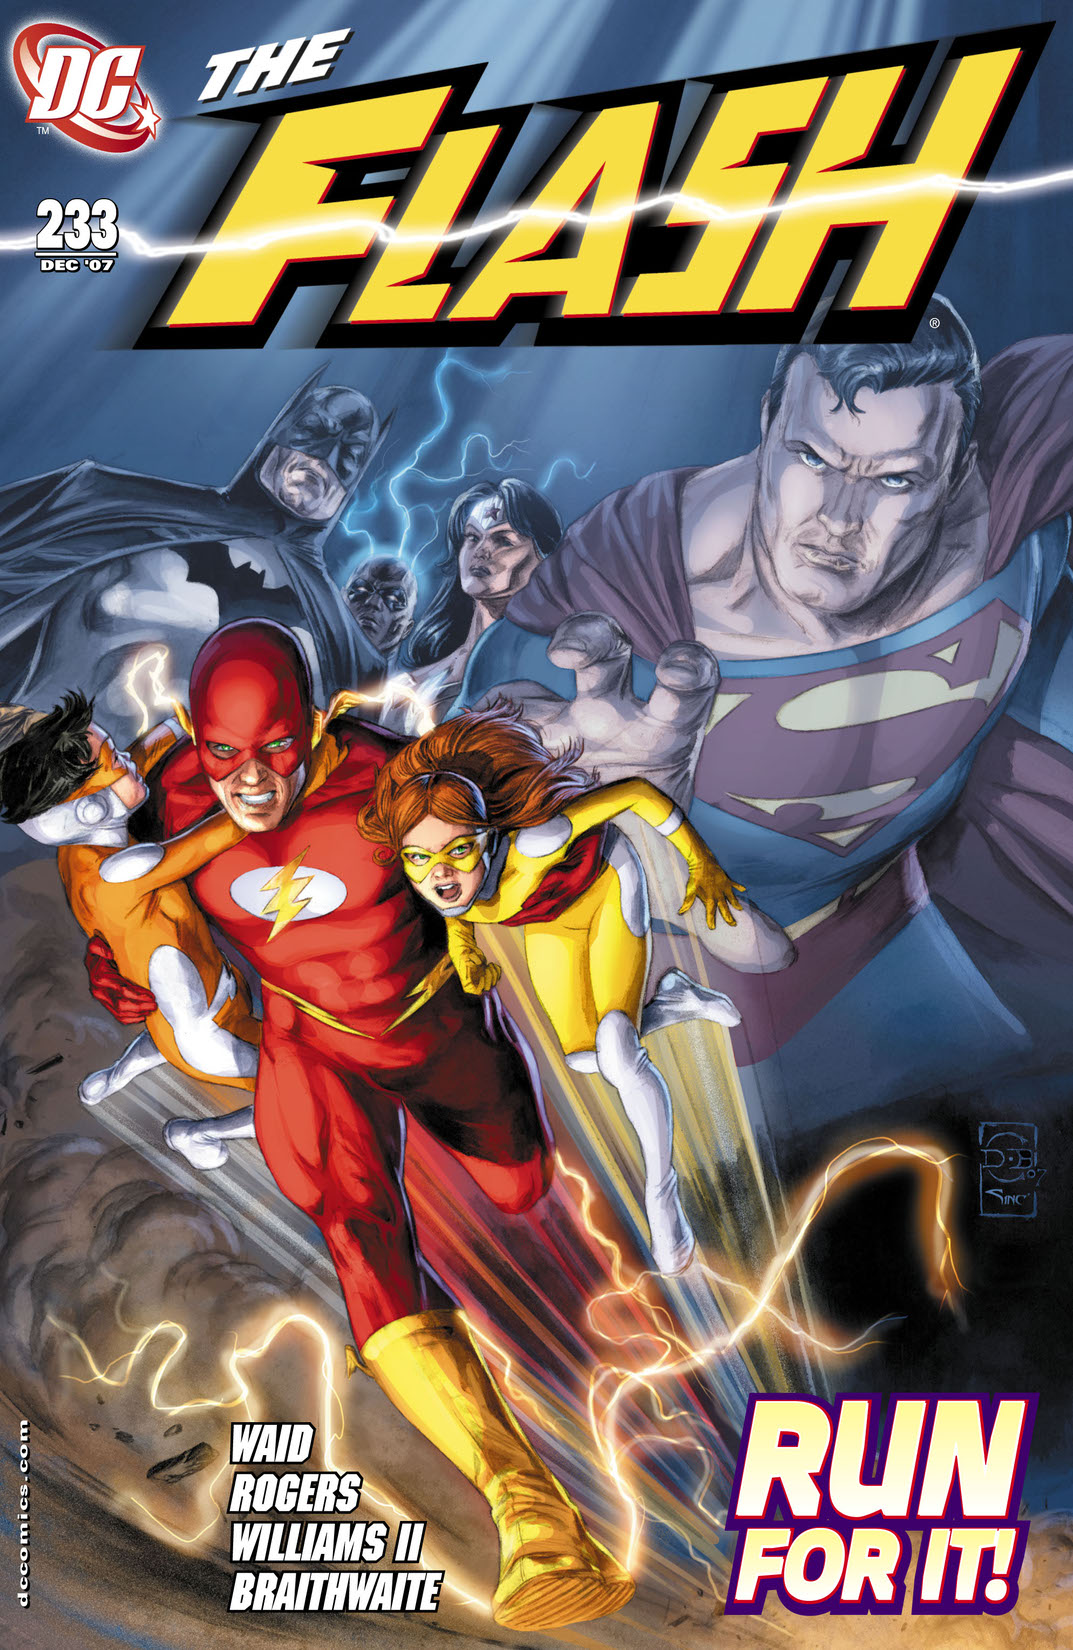 The Flash (1987-) #233 preview images